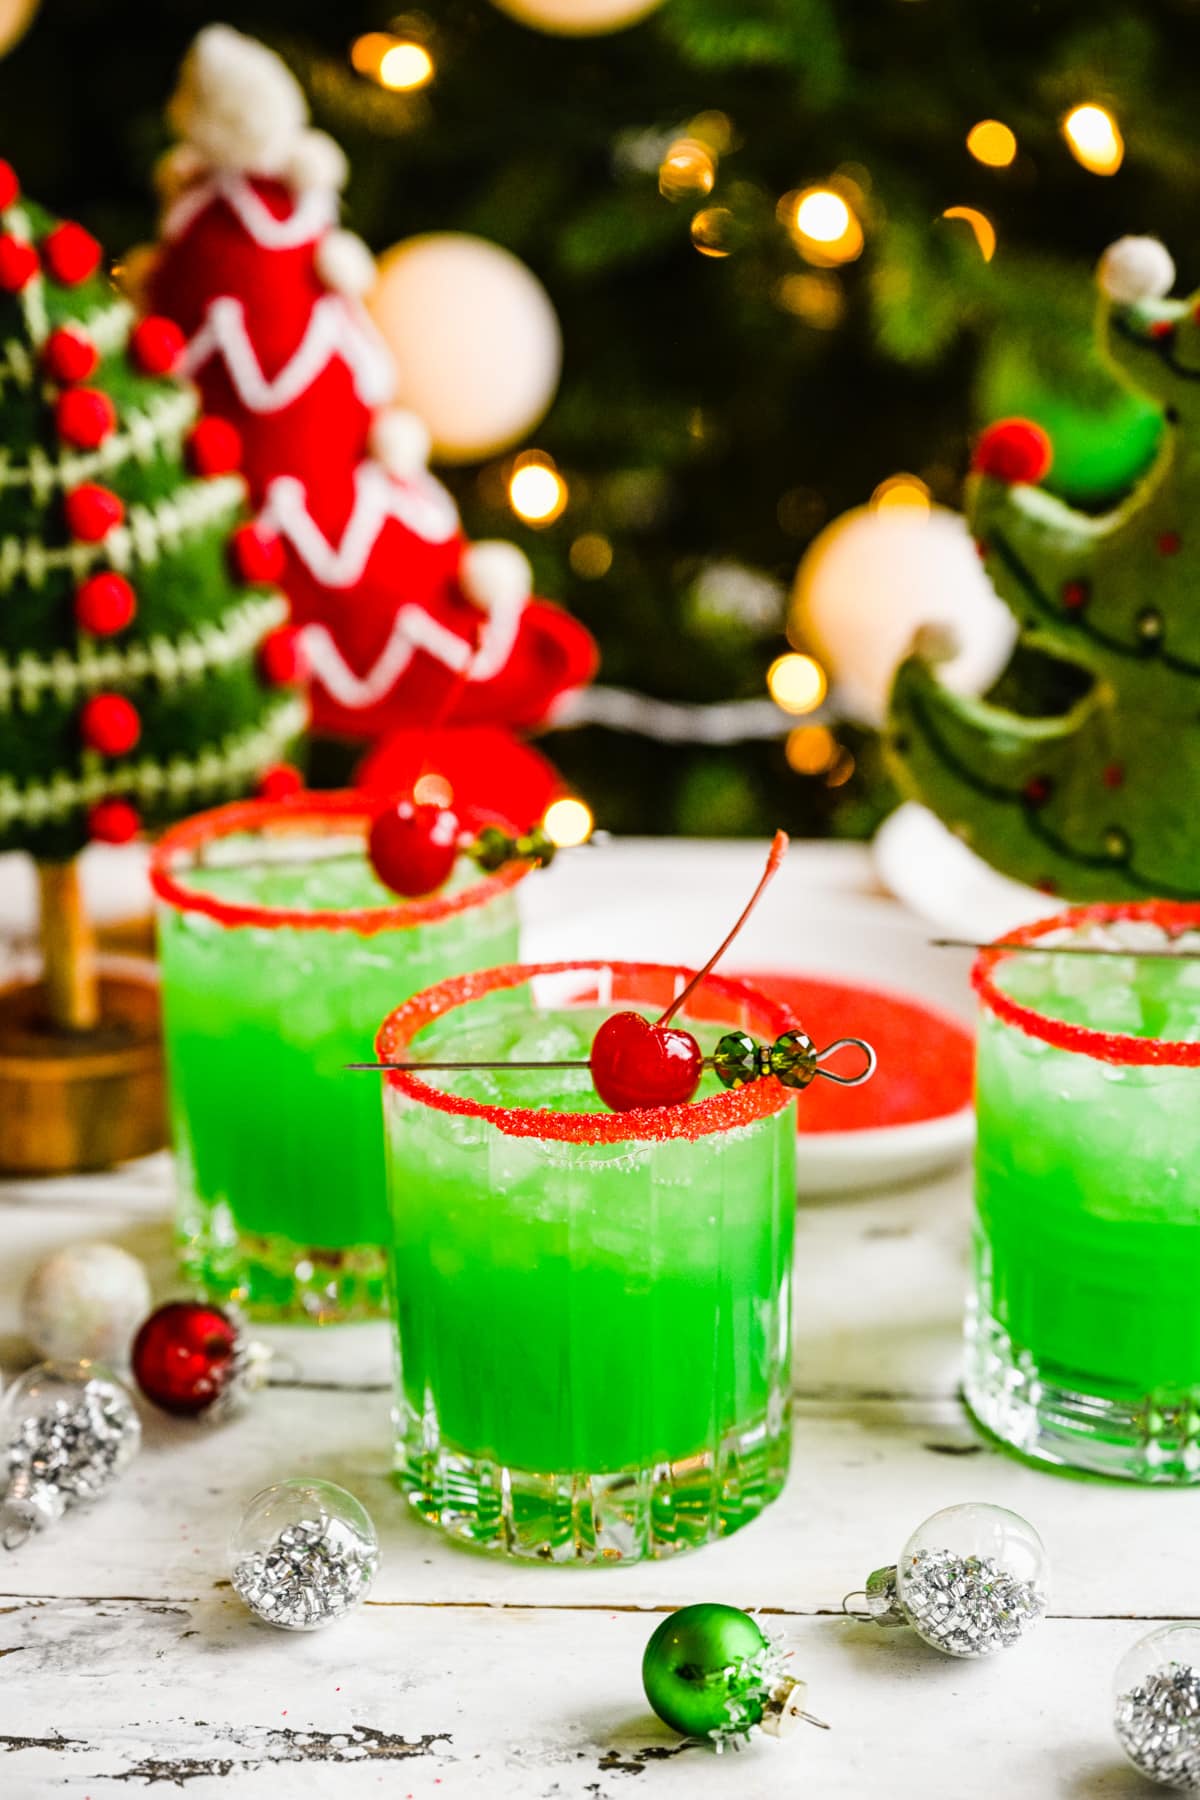 Finished grinch cocktails with cherry garnish and red rim.